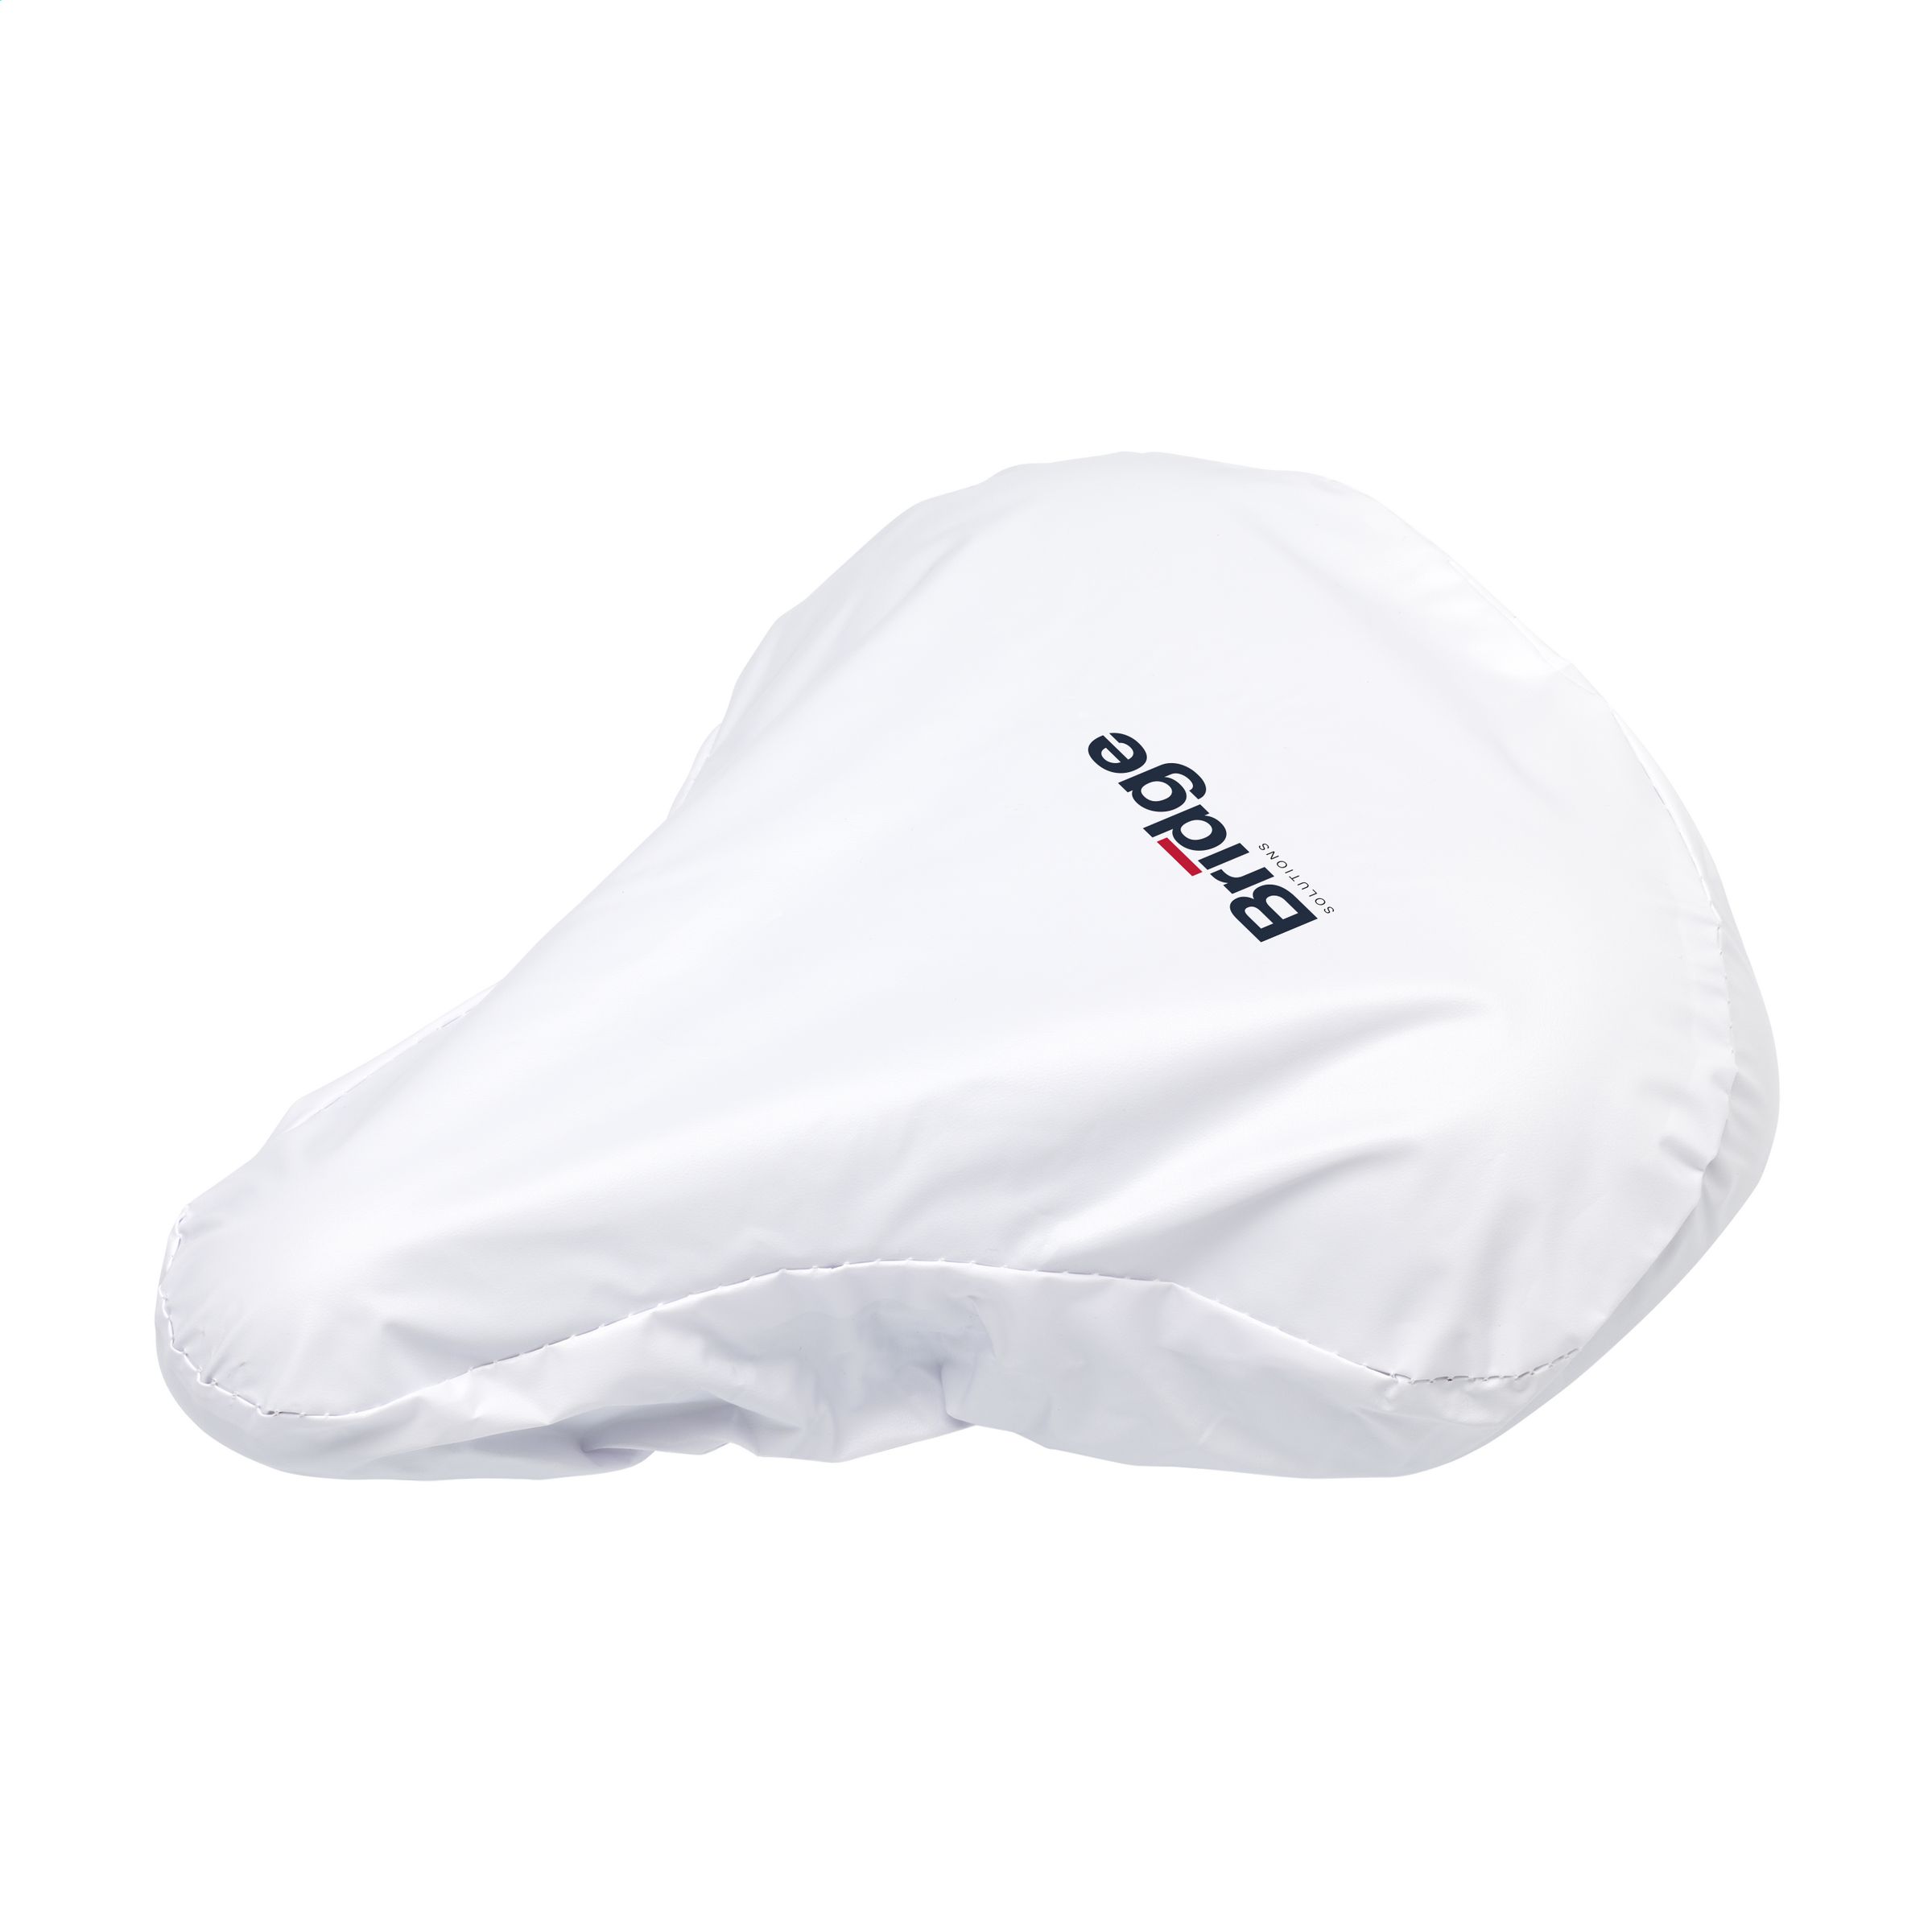 Recycled PVC Bicycle Seat Cover - Harrogate